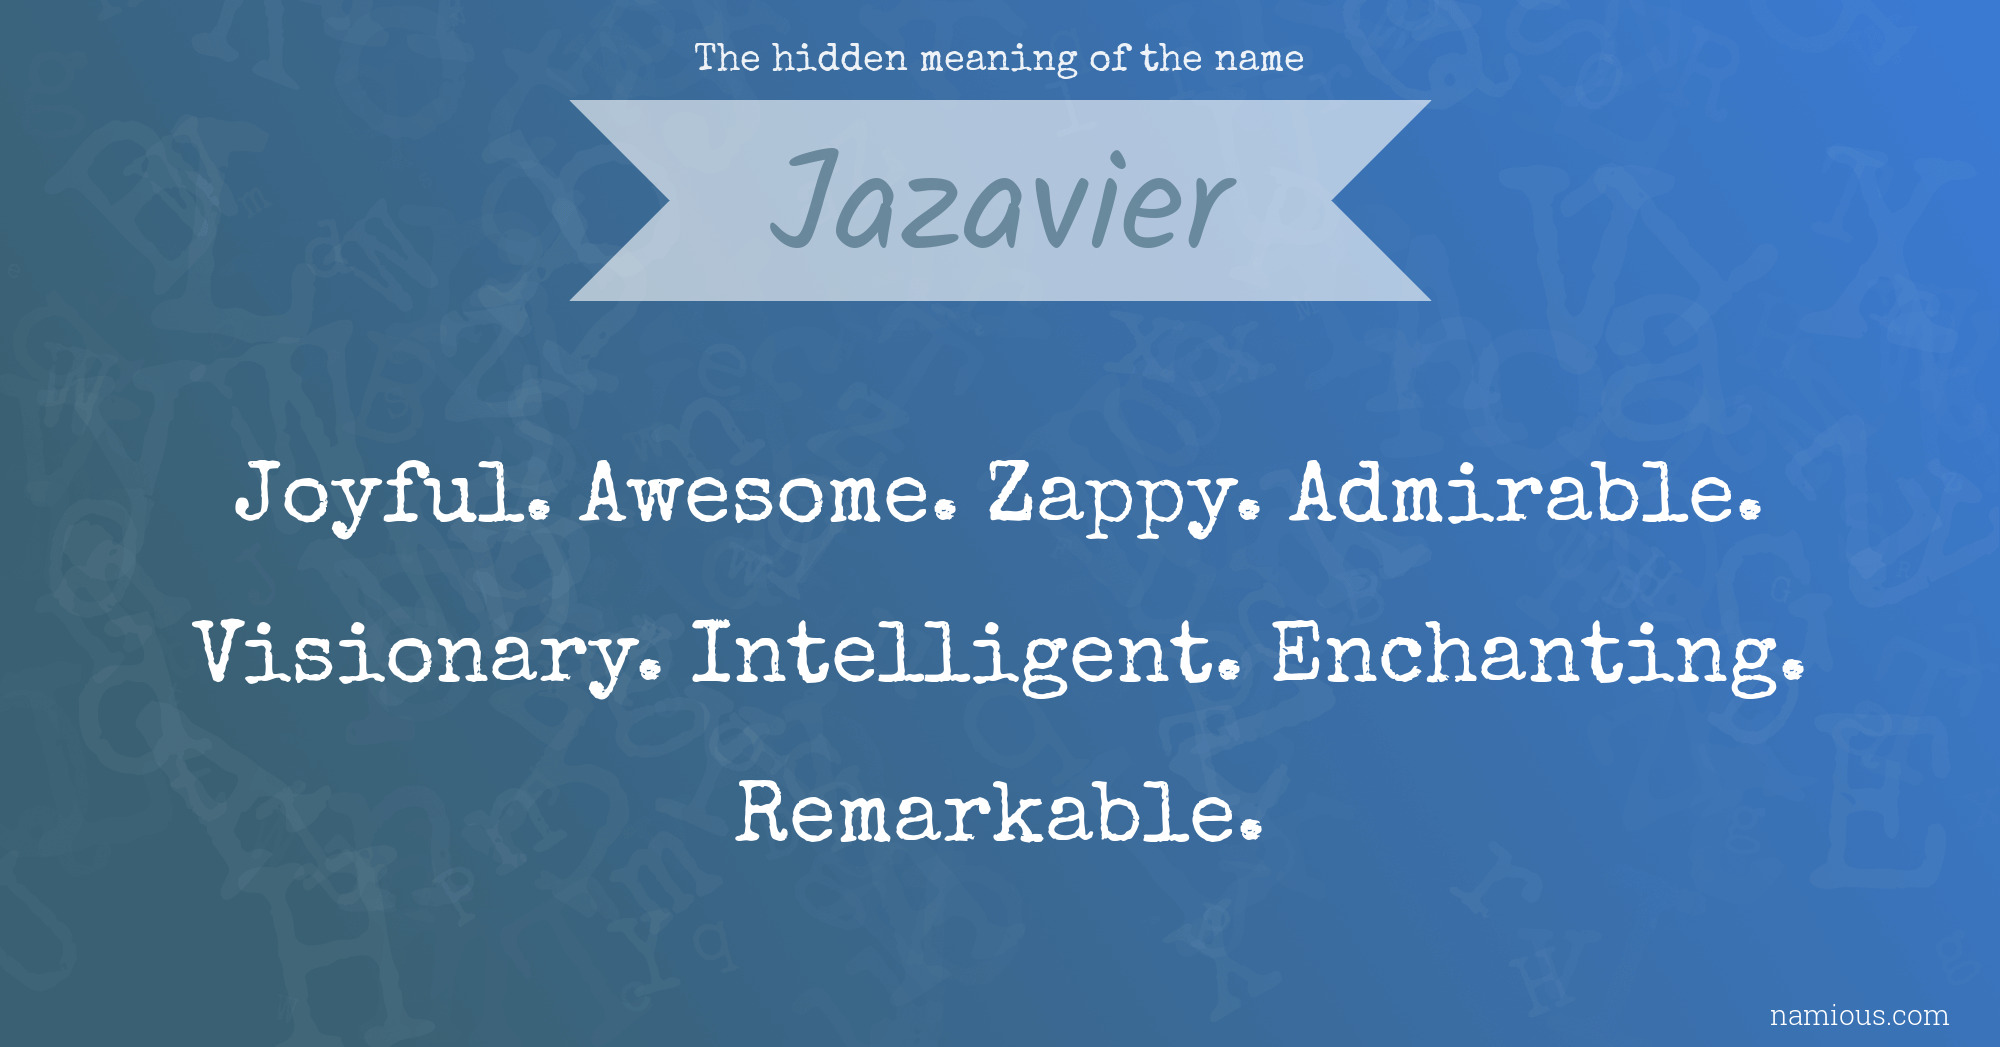 The hidden meaning of the name Jazavier